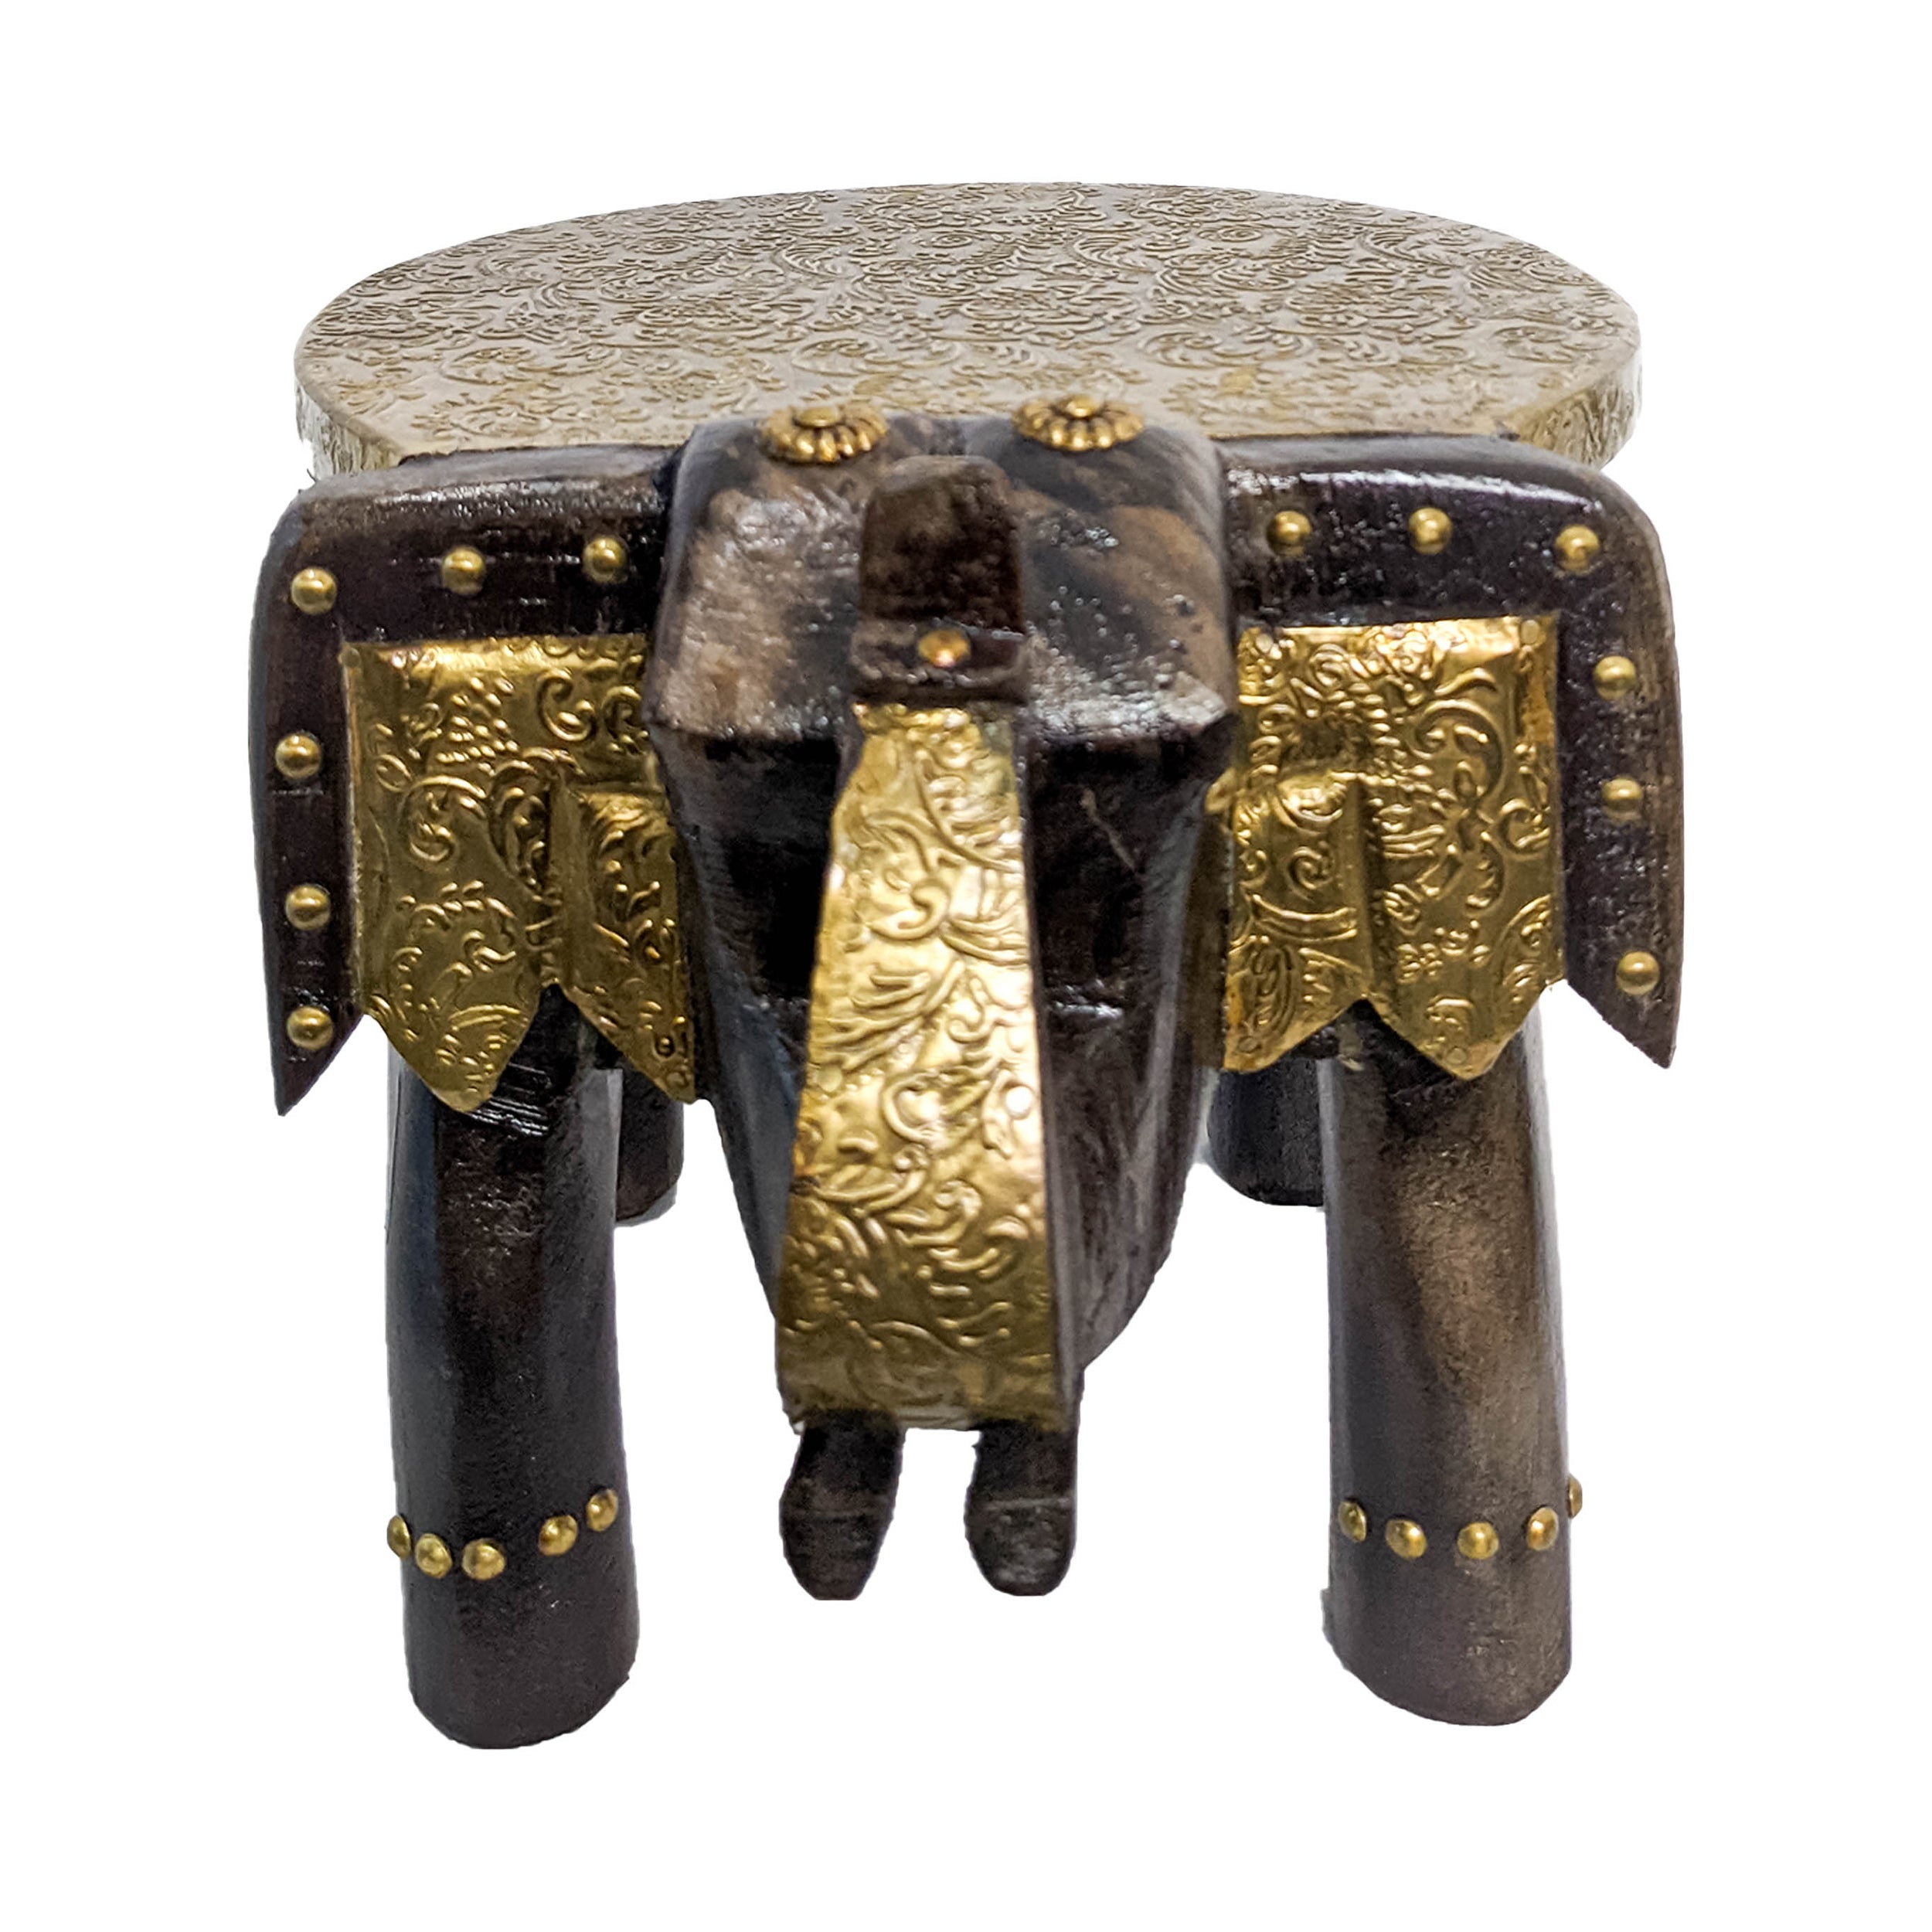 Handcrafted Wooden Elephant Table